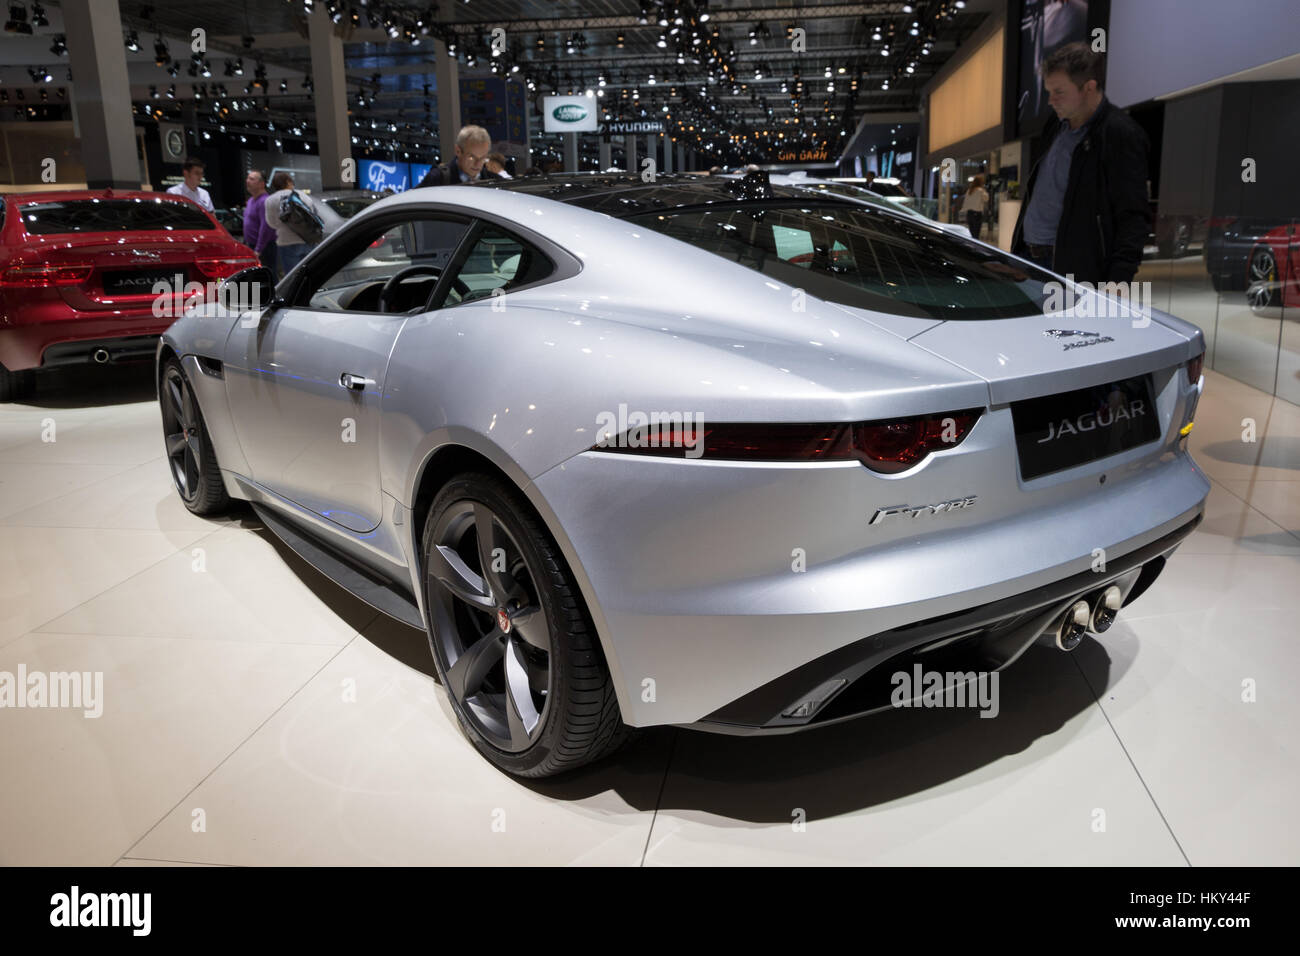 BRUSSELS - JAN 19, 2017: Jaguar F-Type on display at the Motor Show Brussels. Stock Photo